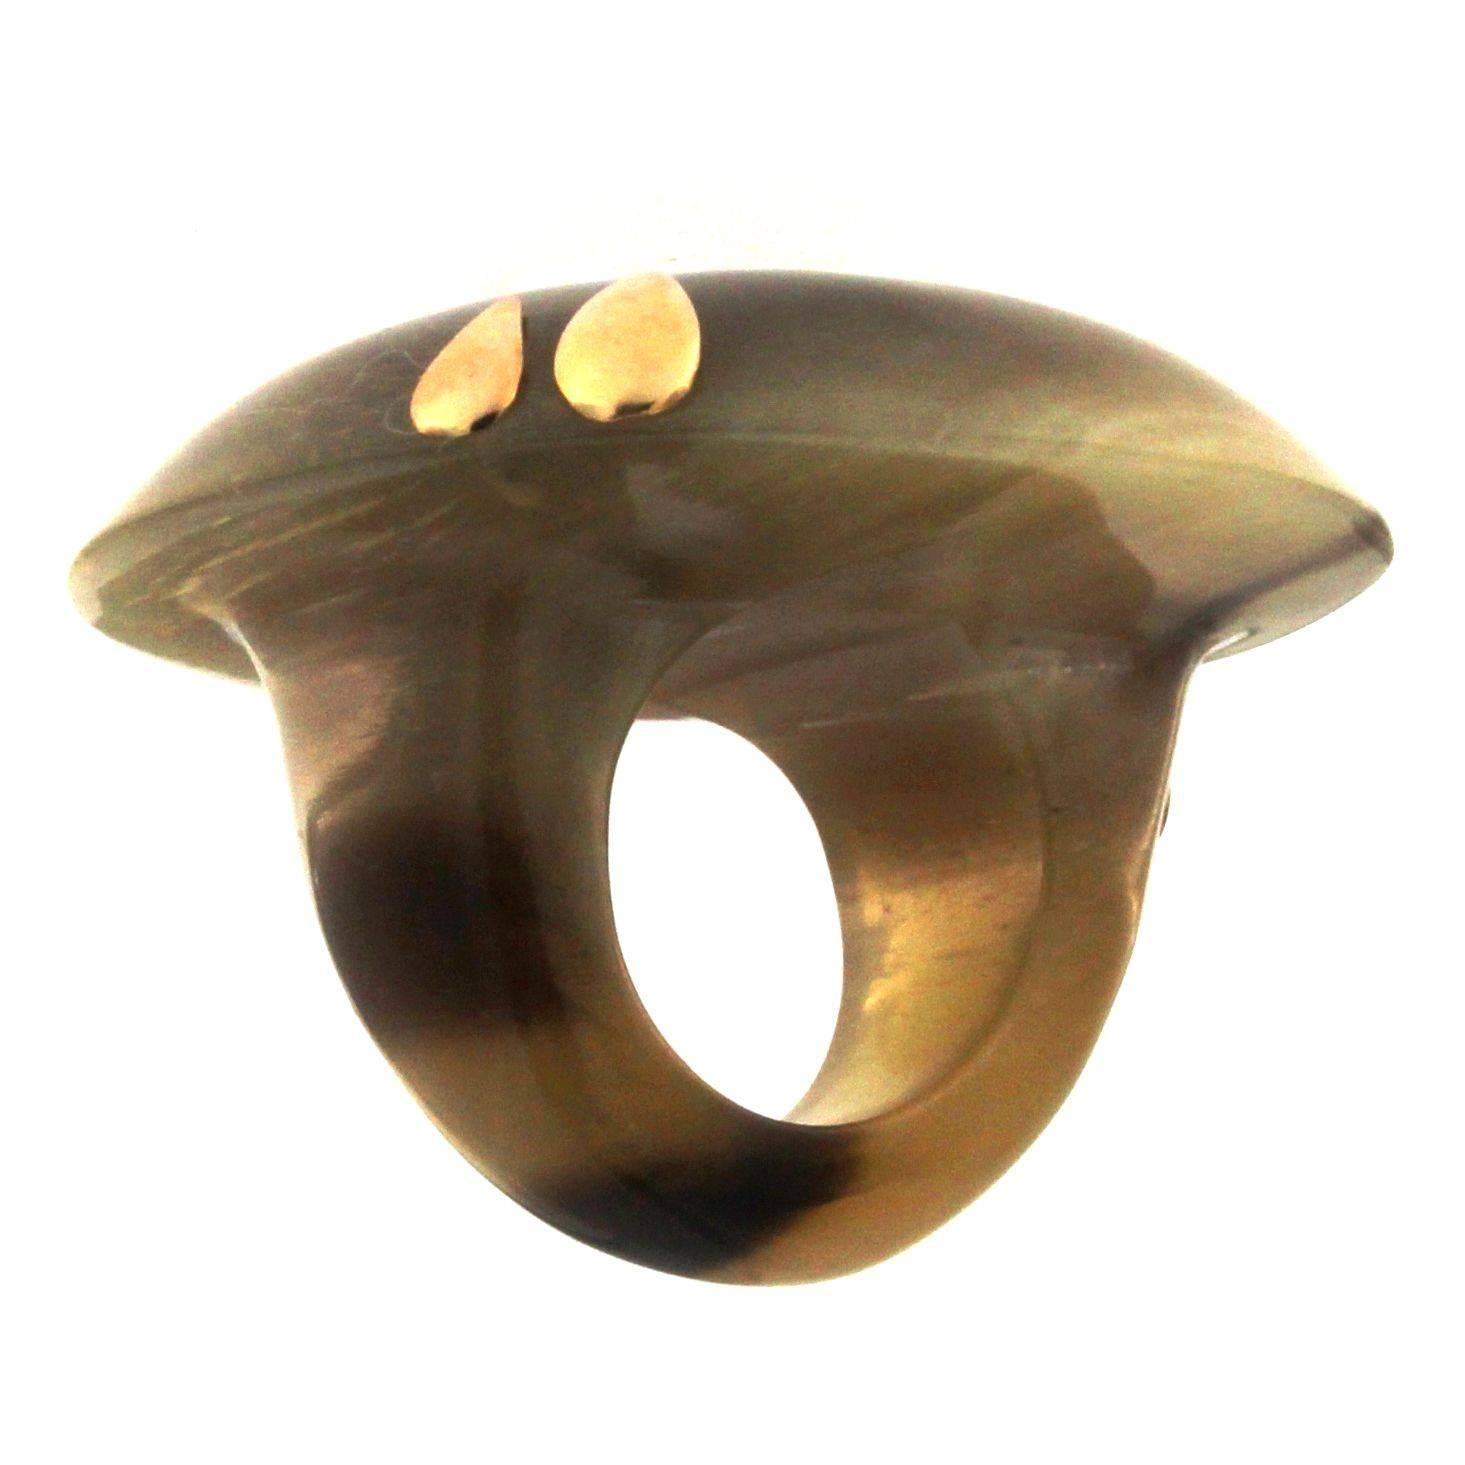 White Bufalo horn ring in 18 kt yellow gold mat

the total weight of the gold is 1.00

us size 7
STAMP: 10 MI ITALY 750

